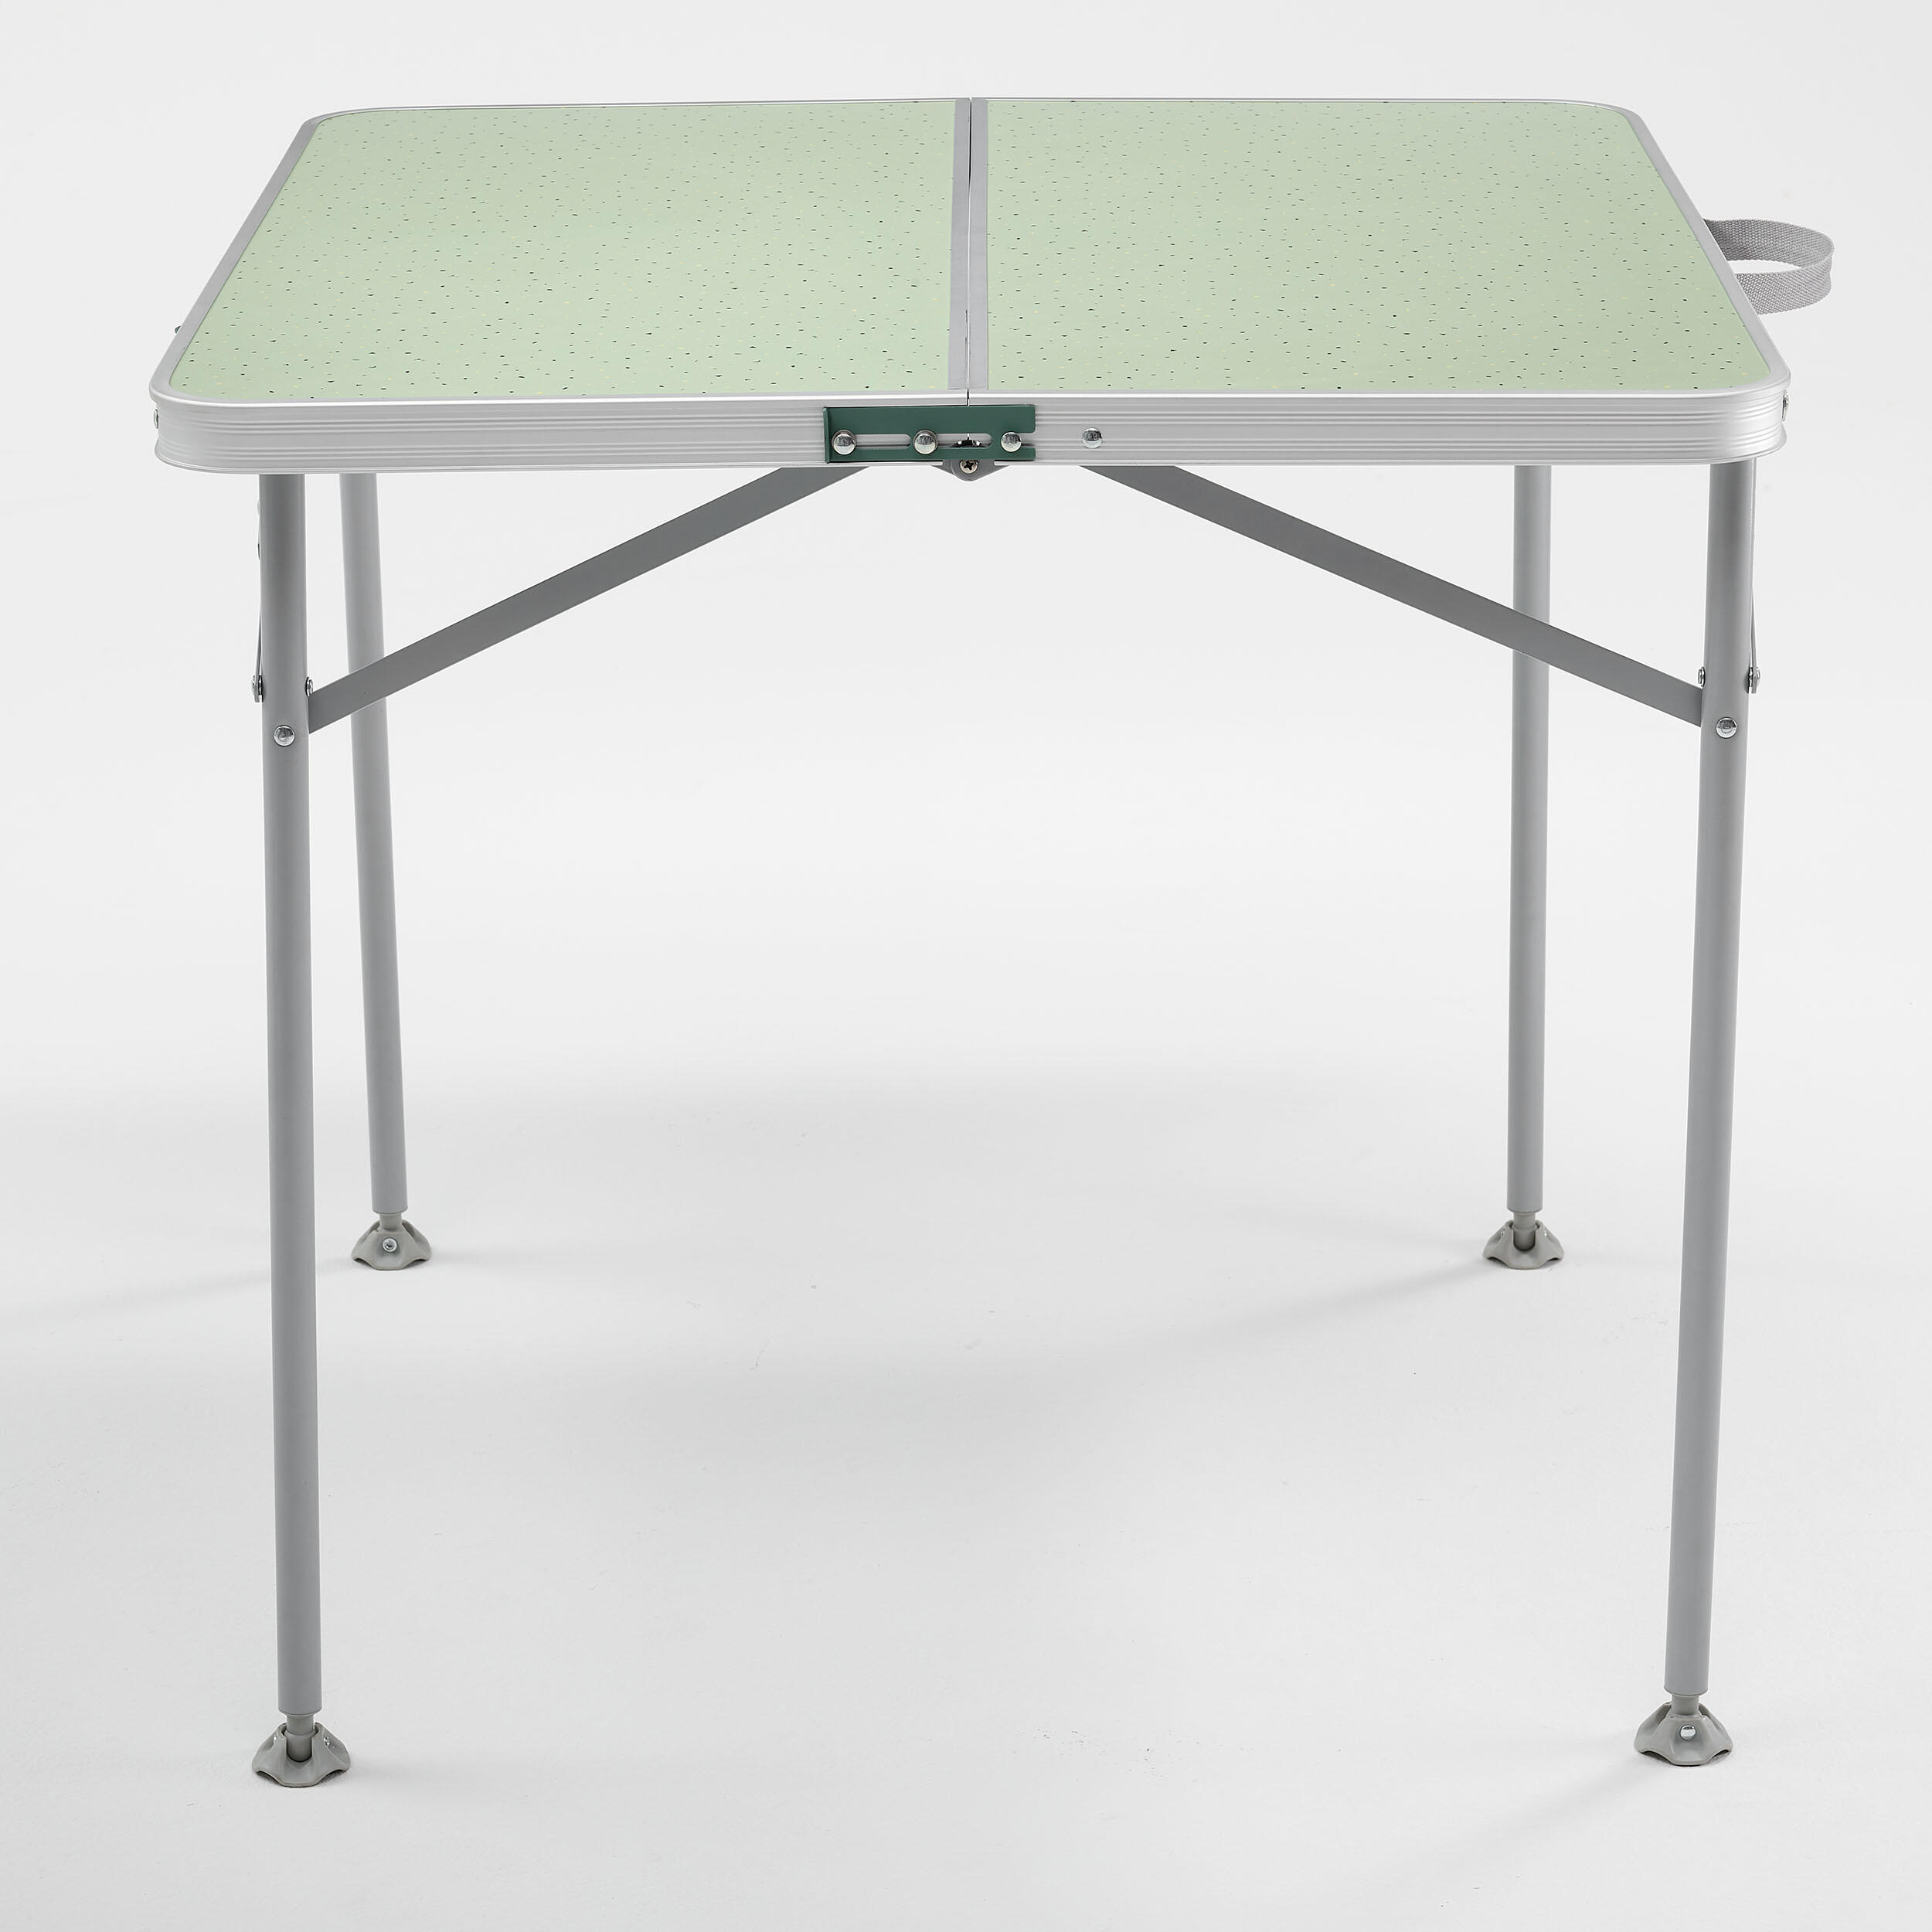 FOLDING CAMPING TABLE - 4 PEOPLE 11/11